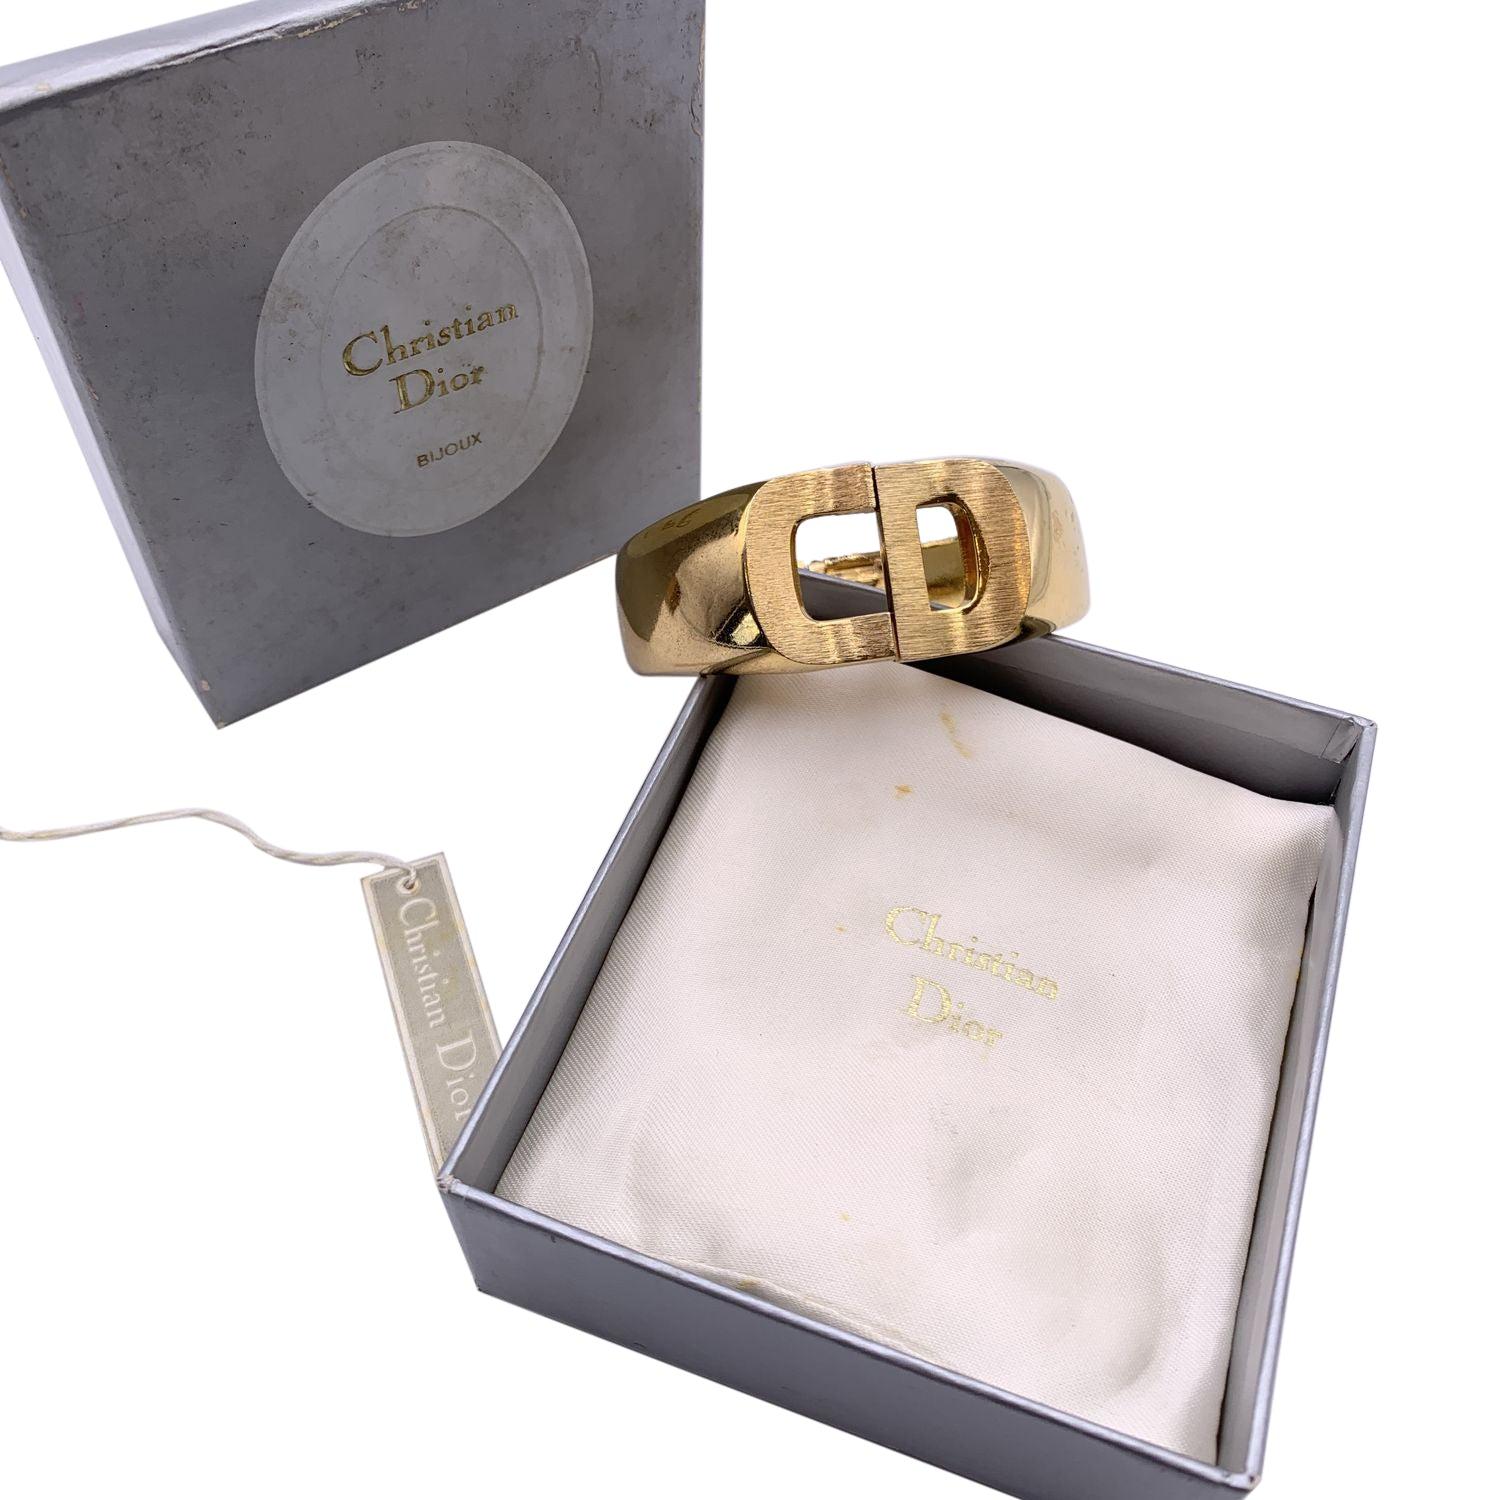 Vintage cuff clamper CD logo bracelet by Christian Dior, from the 1970. Gold plated metal. Signed '1972 - Chr.Dior - Germany' internally. Internal circumference: 7 inches - 17.8 cm. Height: 30 mm Condition A - EXCELLENT Gently used. Please check